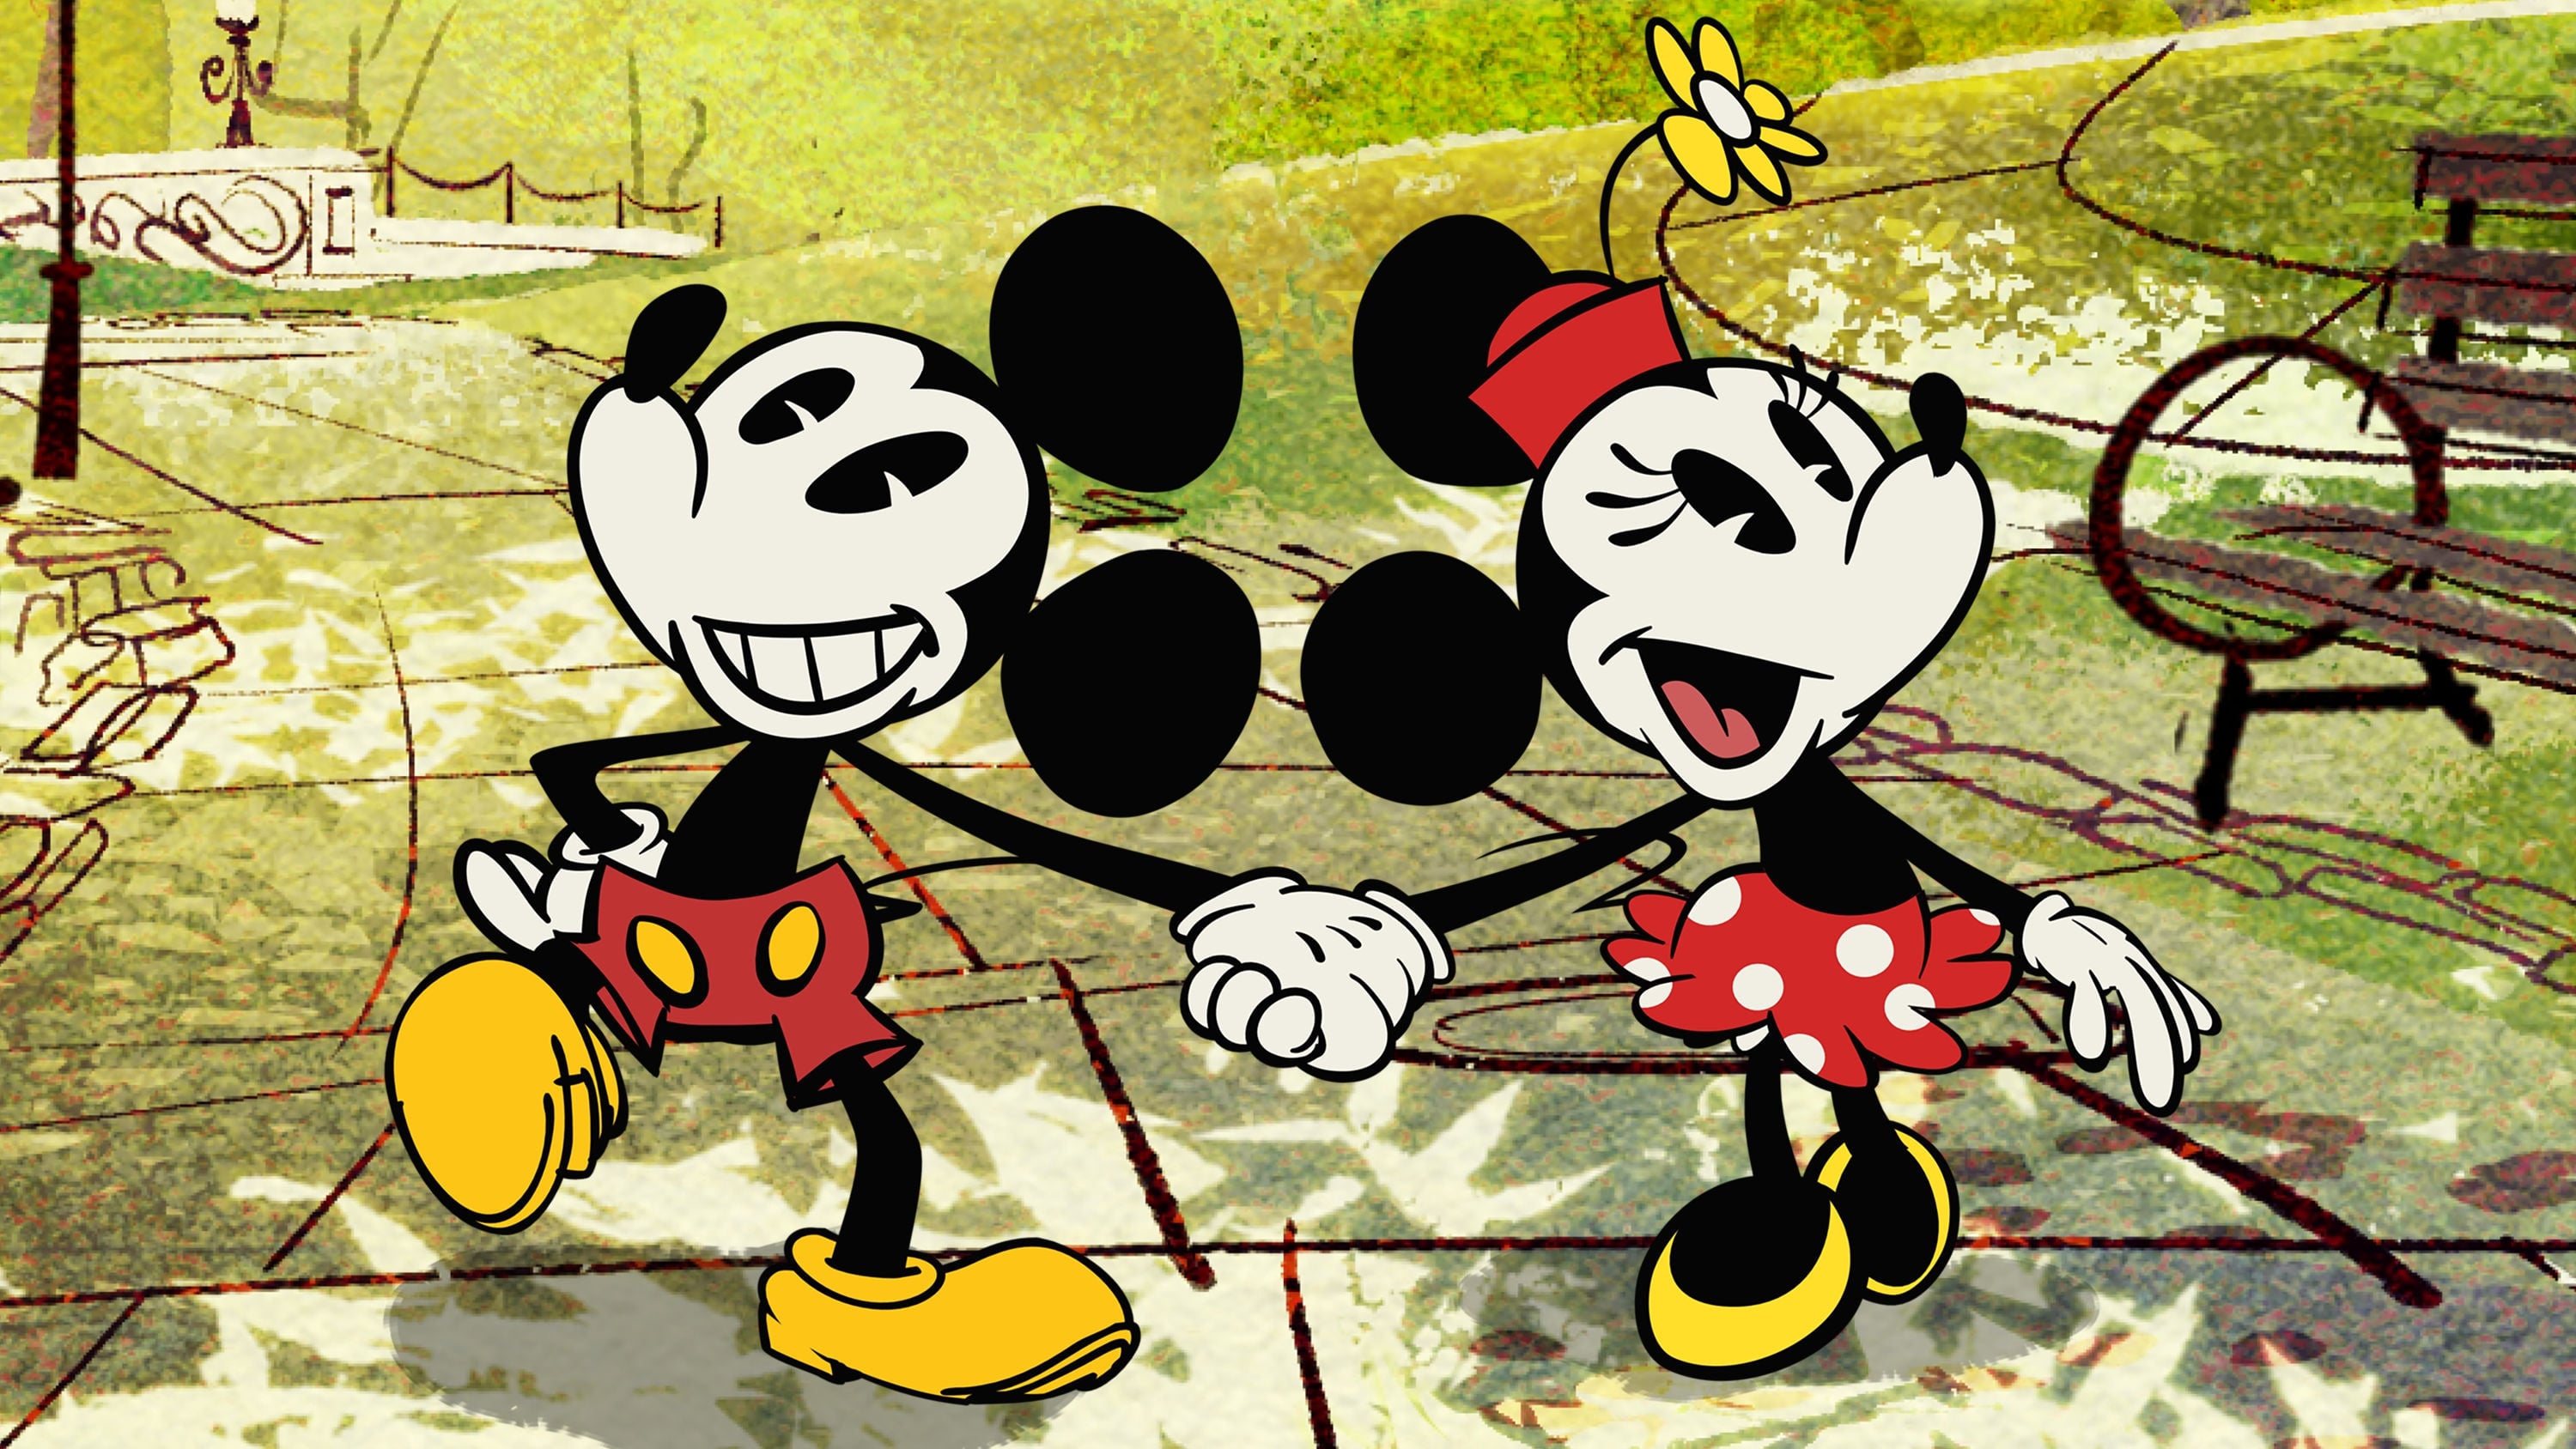  Mickey  Mouse  TV Series 2013 Backdrops  The Movie 